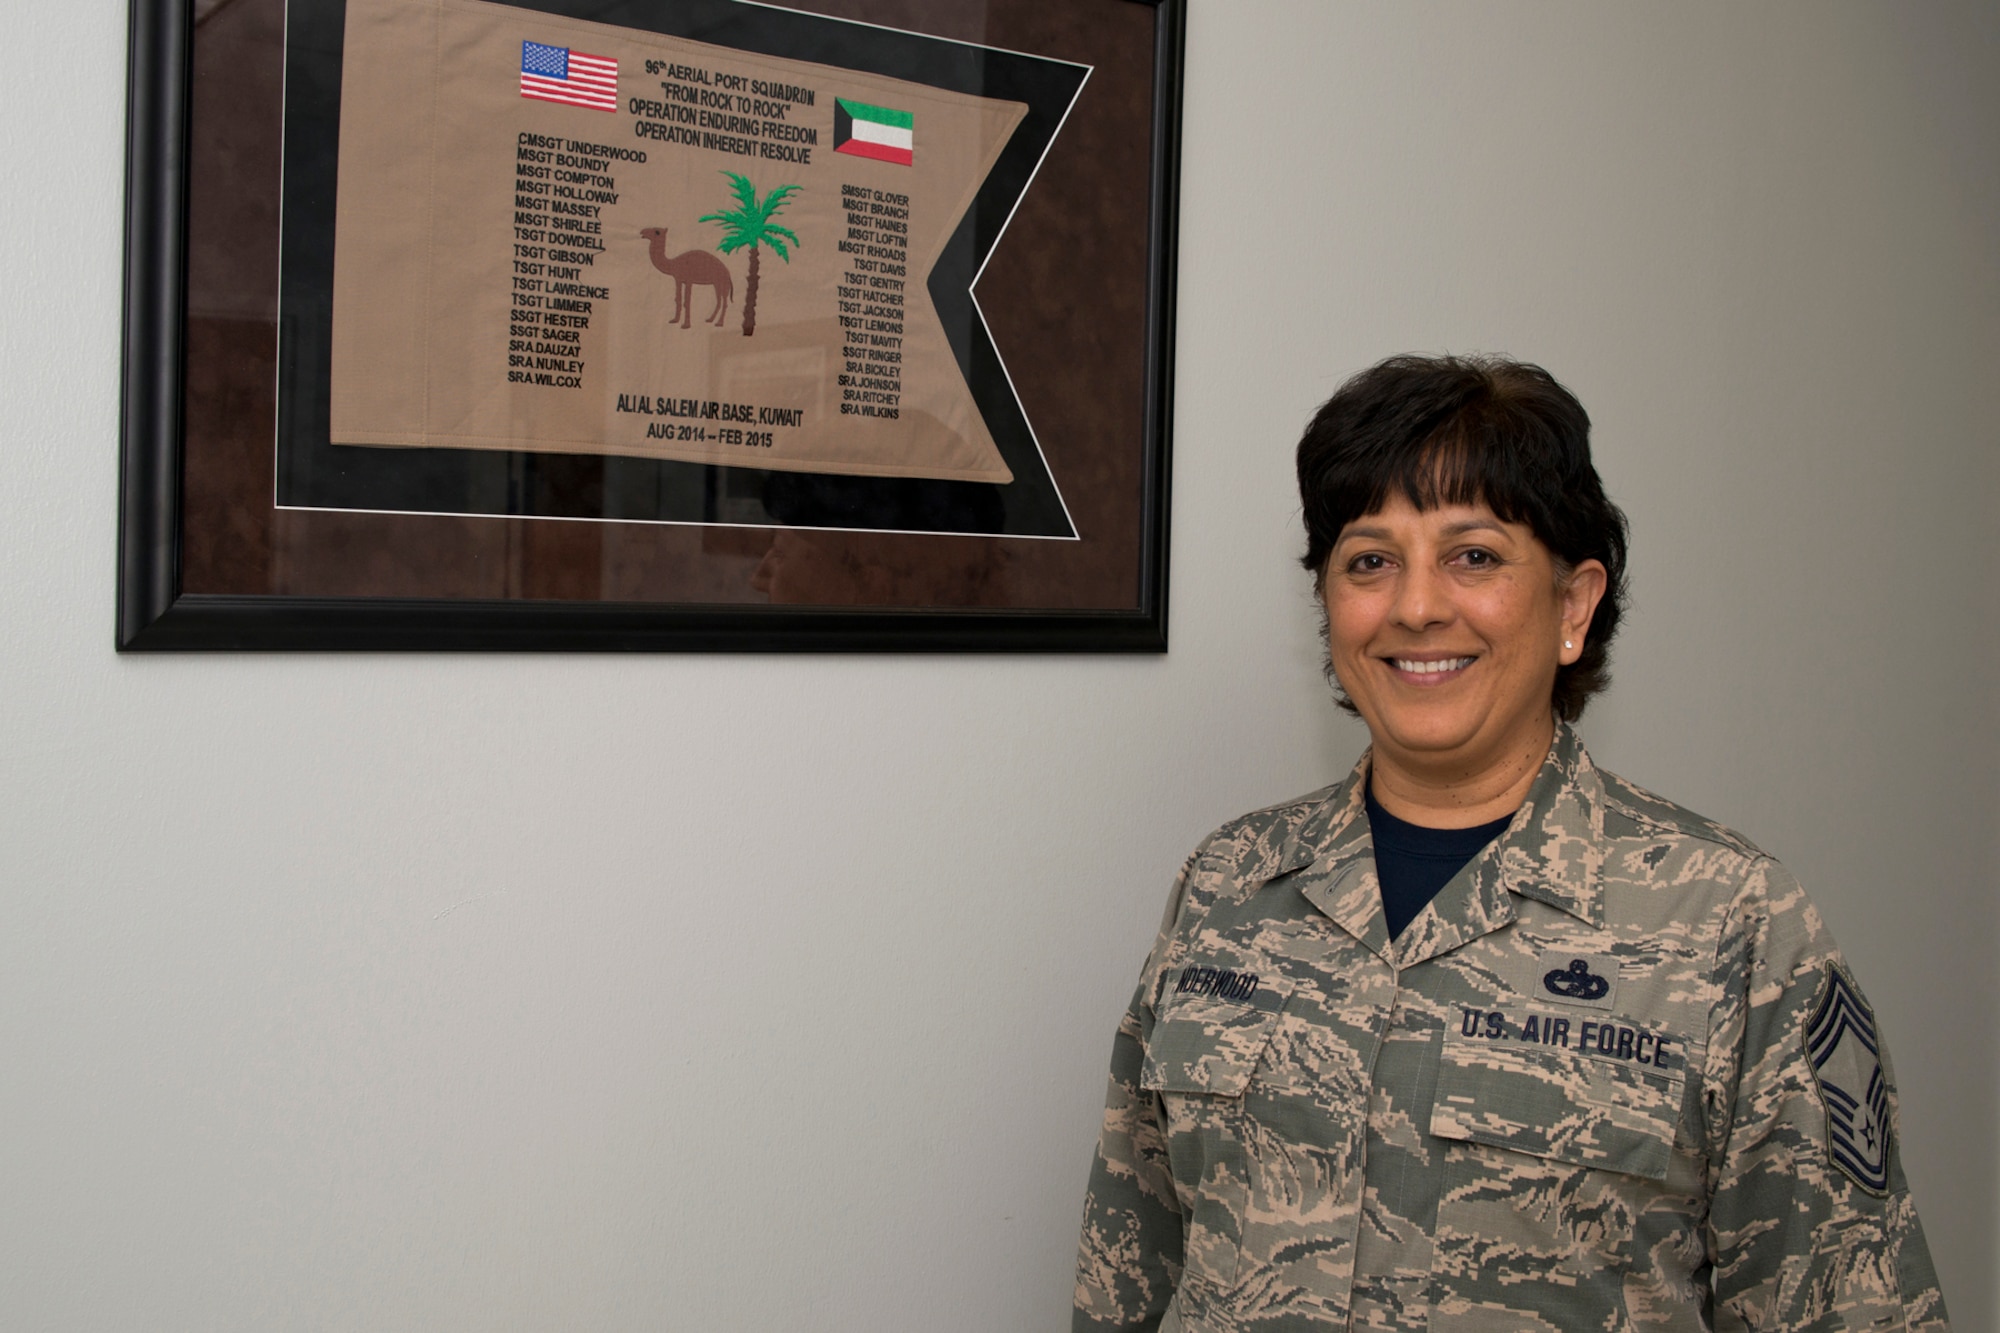 U.S. Air Force Reserve Chief Master Sgt. Cynthia Underwood, the air transportation superintendent for the 96th Aerial Port Squadron, poses for a photo at Little Rock Air Force Base, Ark., Mar. 4, 2016. The memento flag details the date, time and place of her deployment, which she described as one of the highlights of her Air Force career. (U.S. Air Force photo by Master Sgt. Jeff Walston/Released)